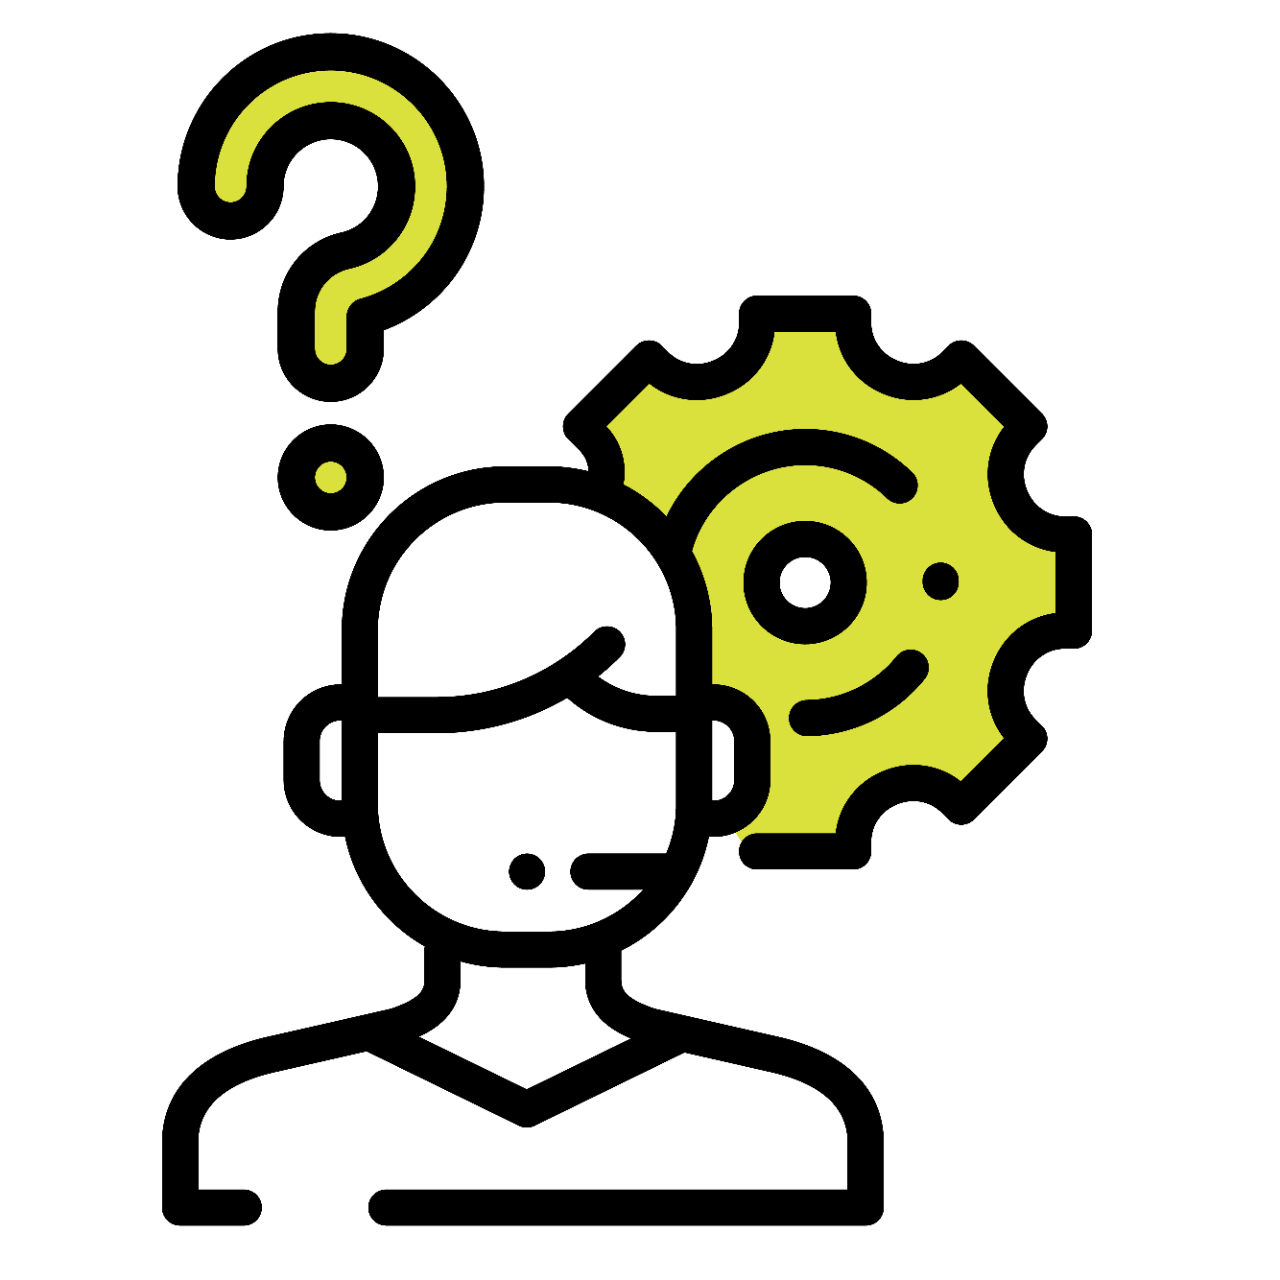 rep and gear question icon